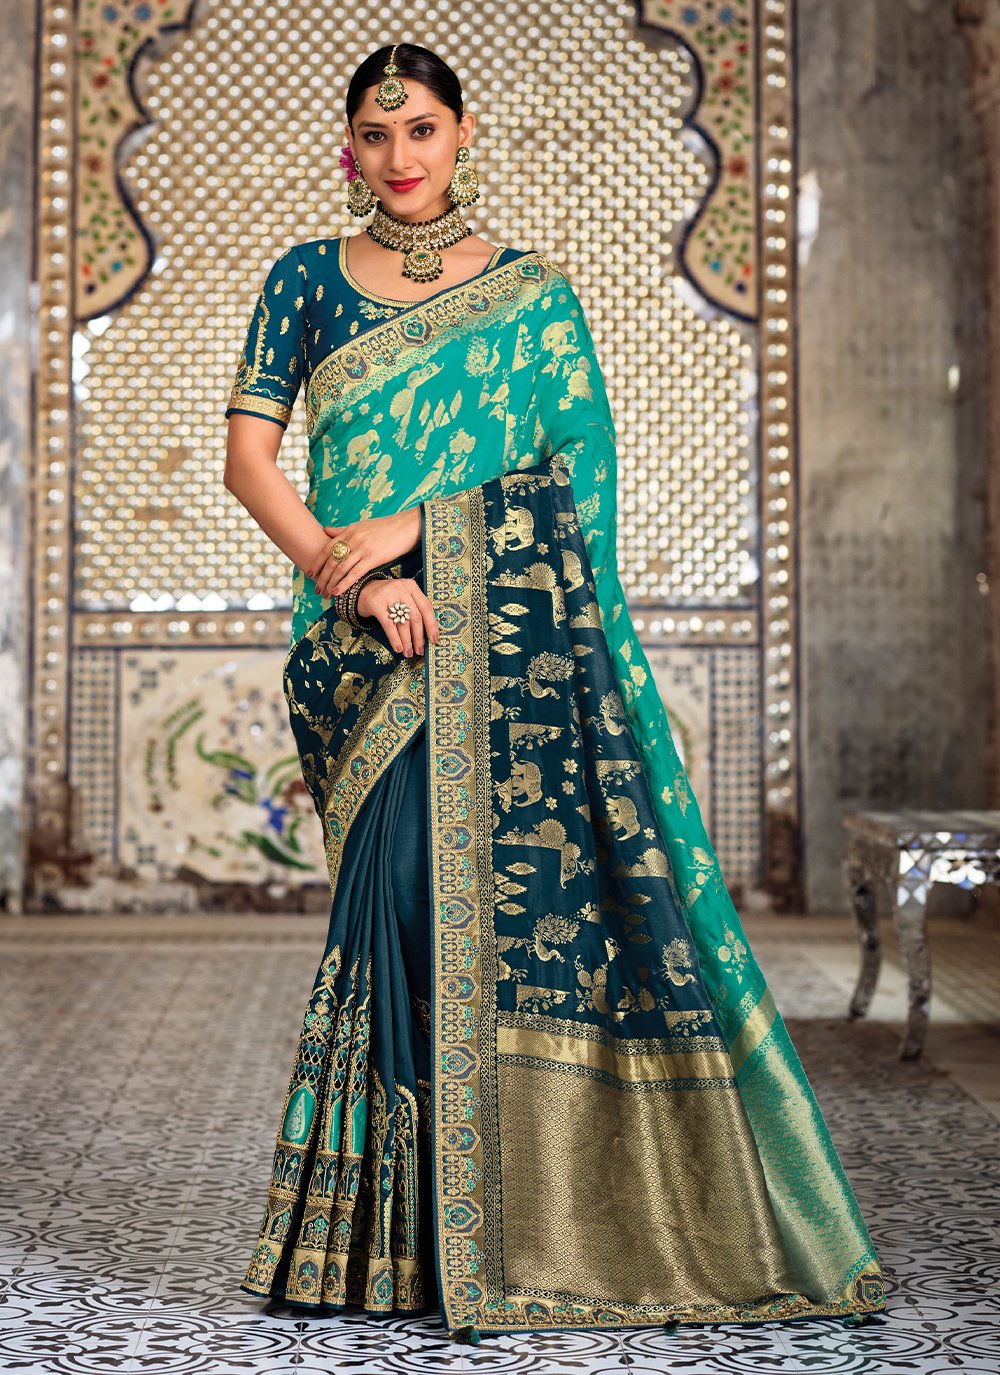 Teal and Turquoise Wedding Shaded Saree